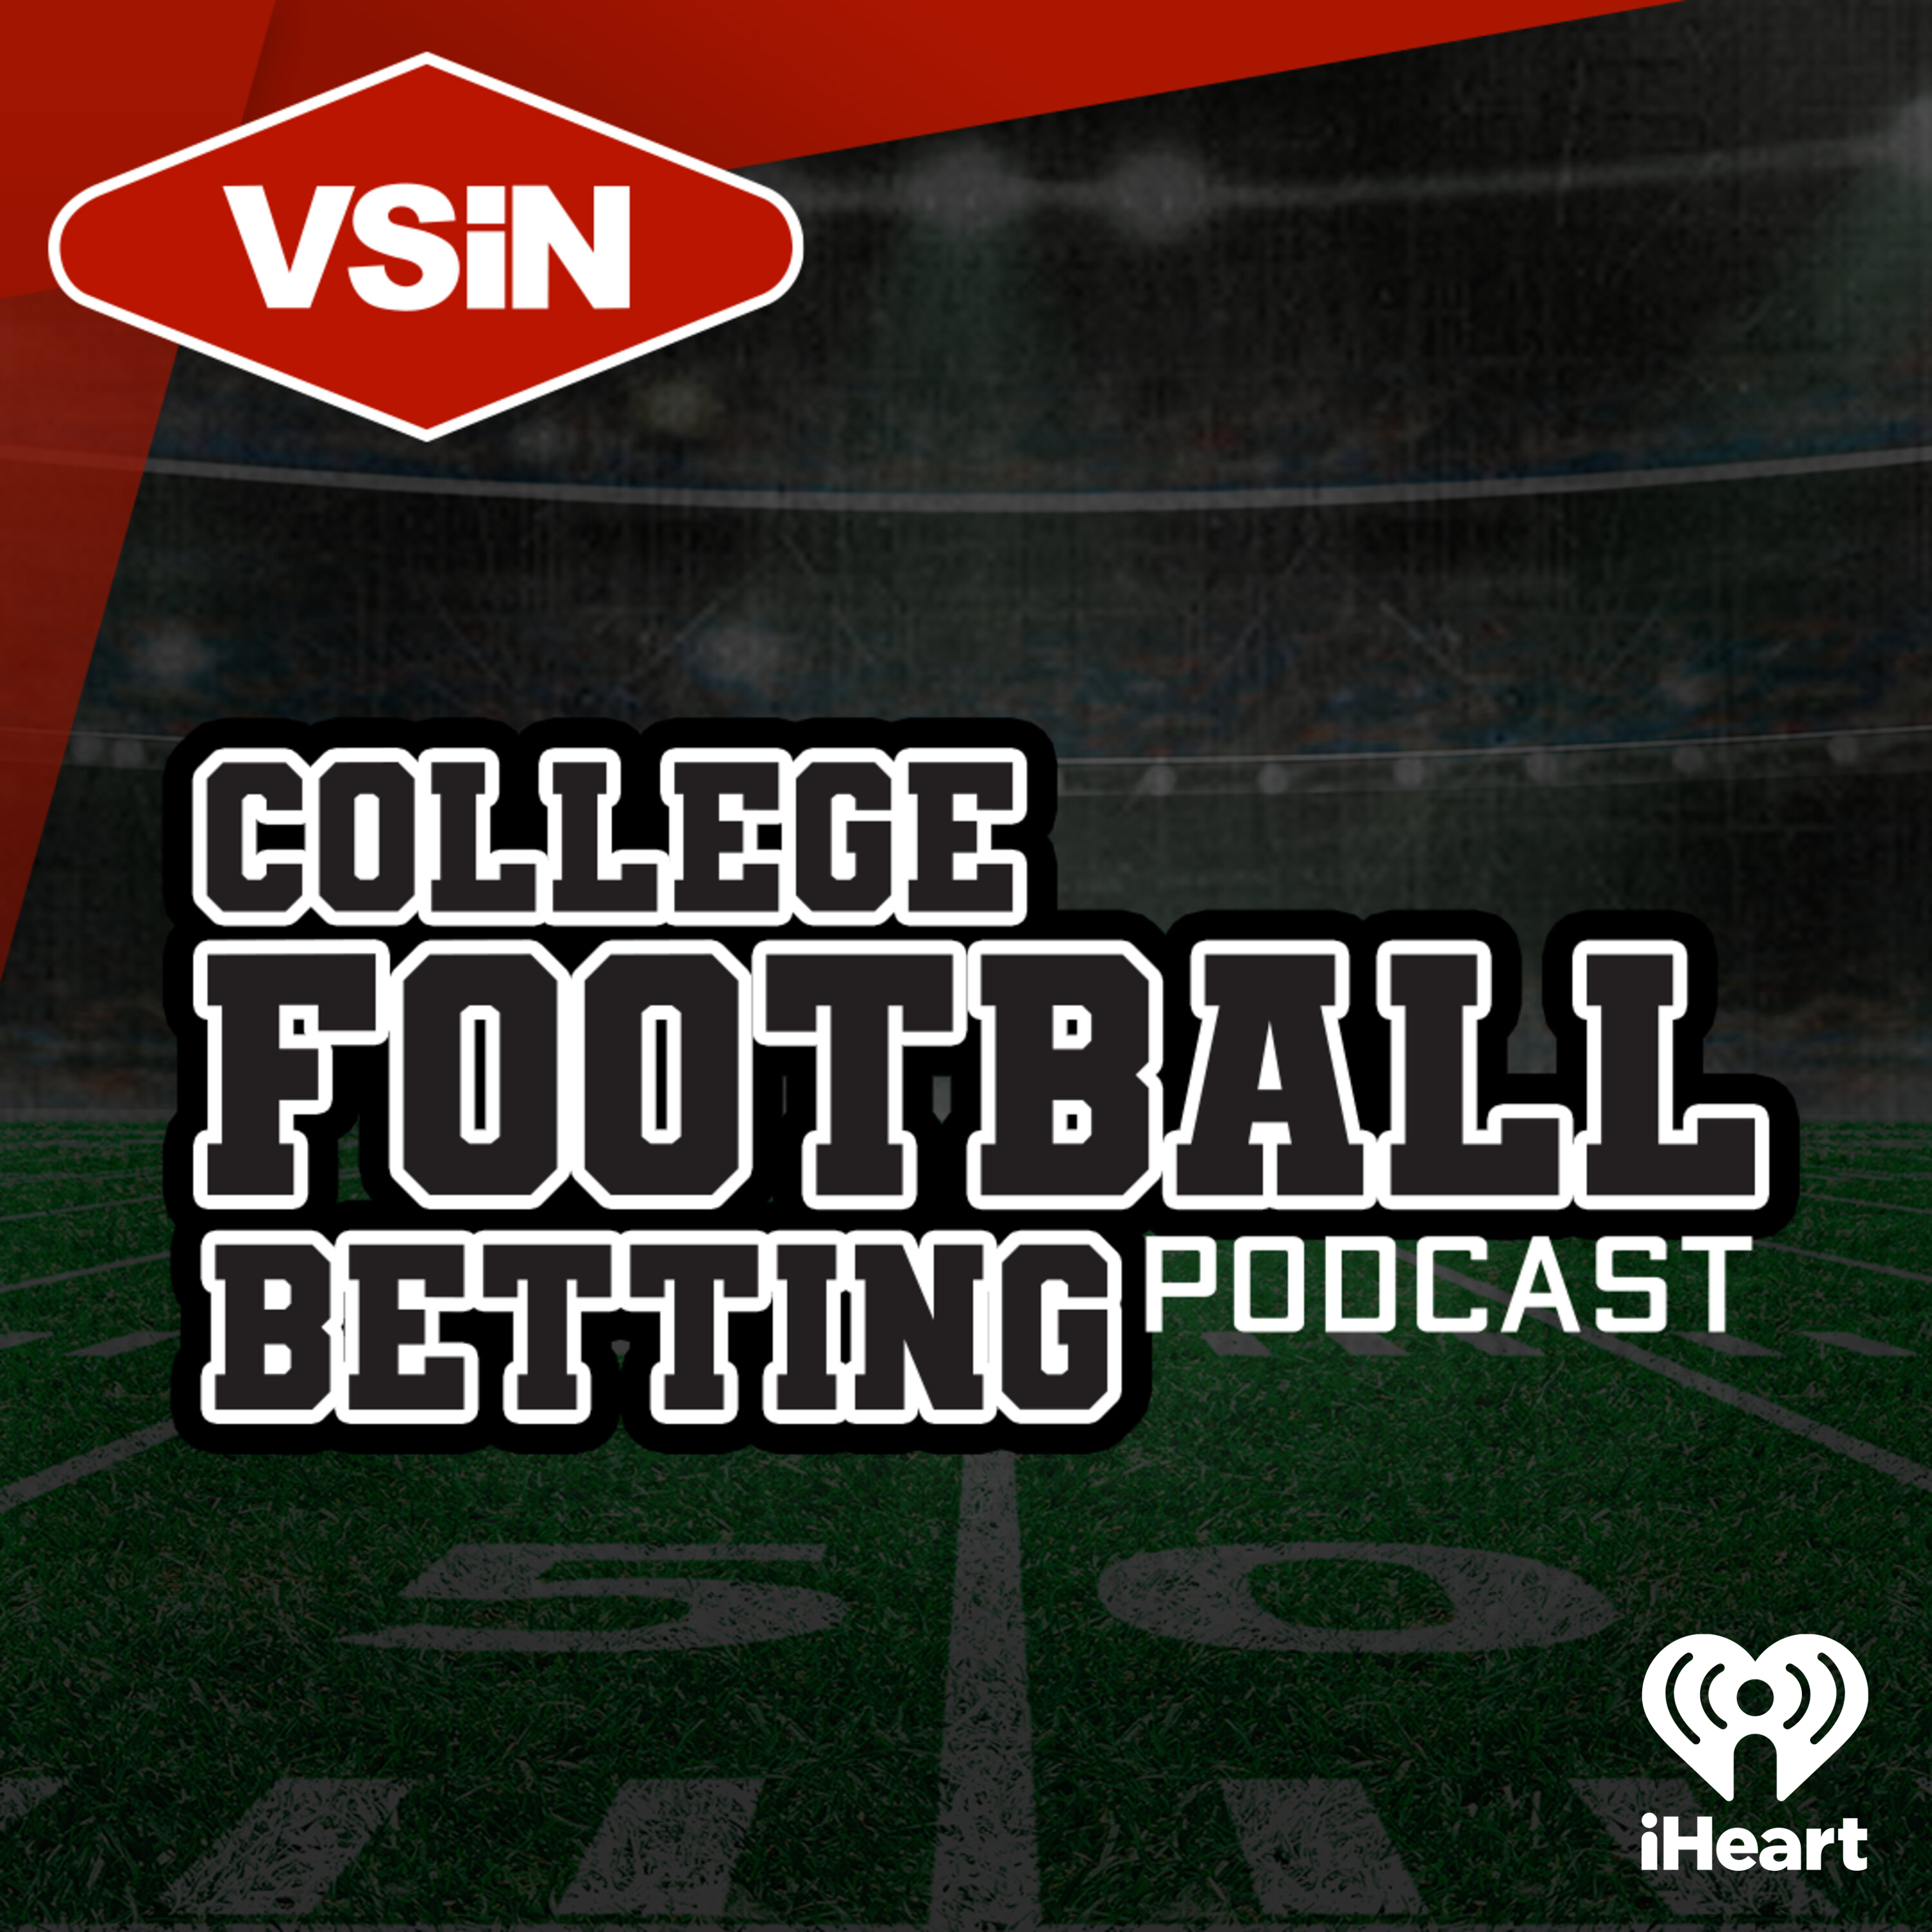 Welcome to the VSiN College Football Betting Podcast!